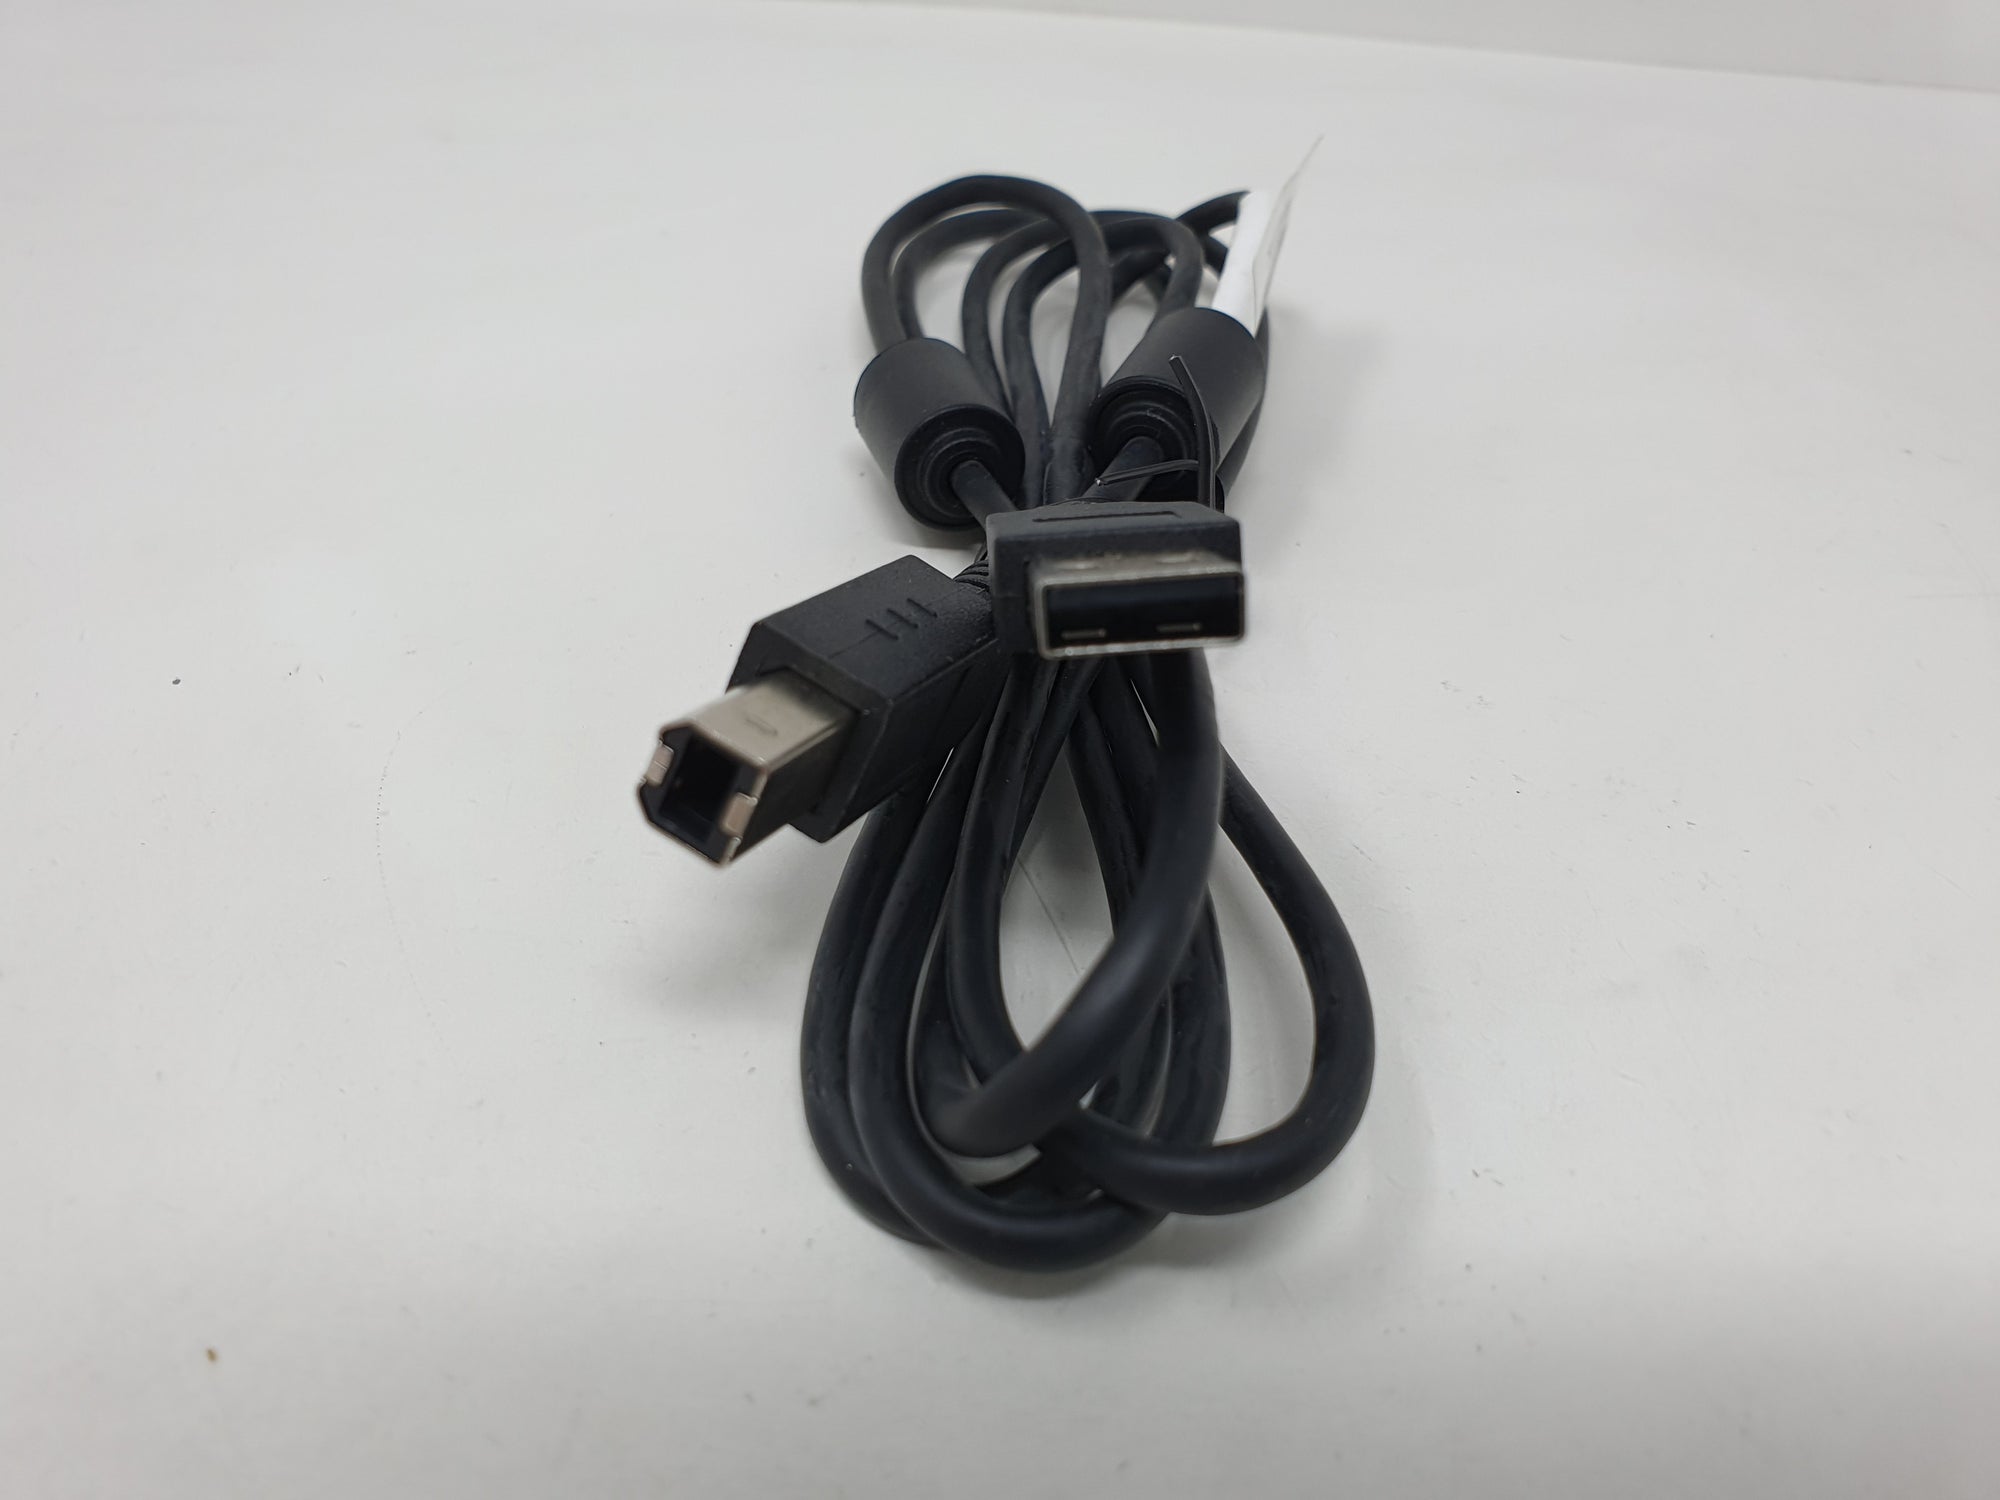 USB Printer Cable Lead Type A to Type B USB 2.0 2M